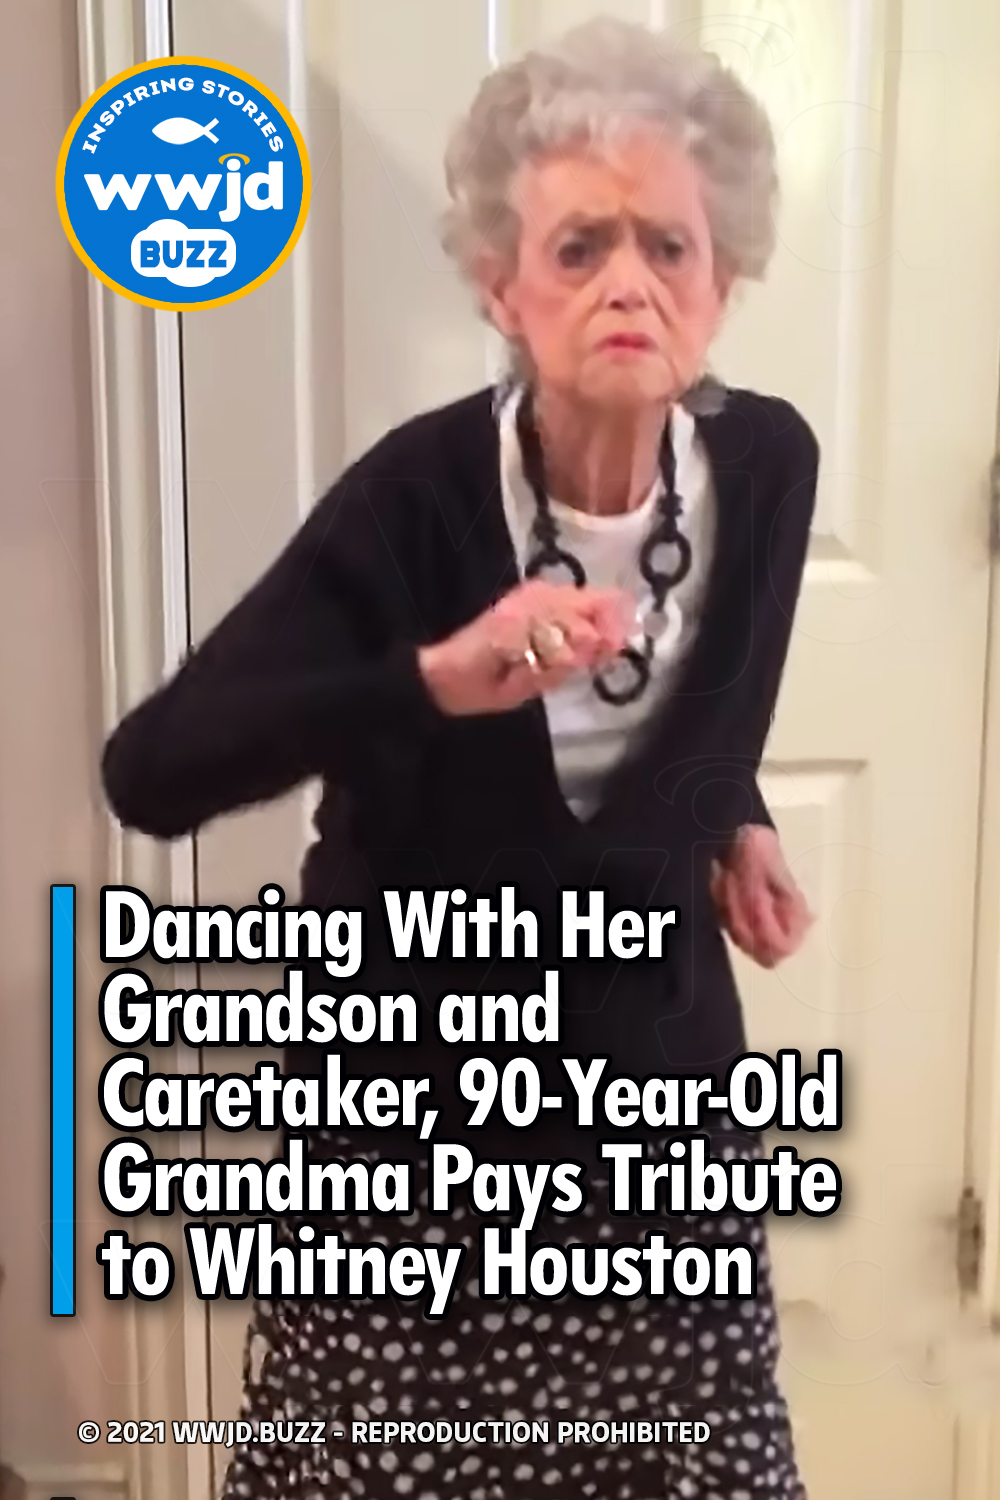 Dancing With Her Grandson and Caretaker, 90-Year-Old Grandma Pays Tribute to Whitney Houston